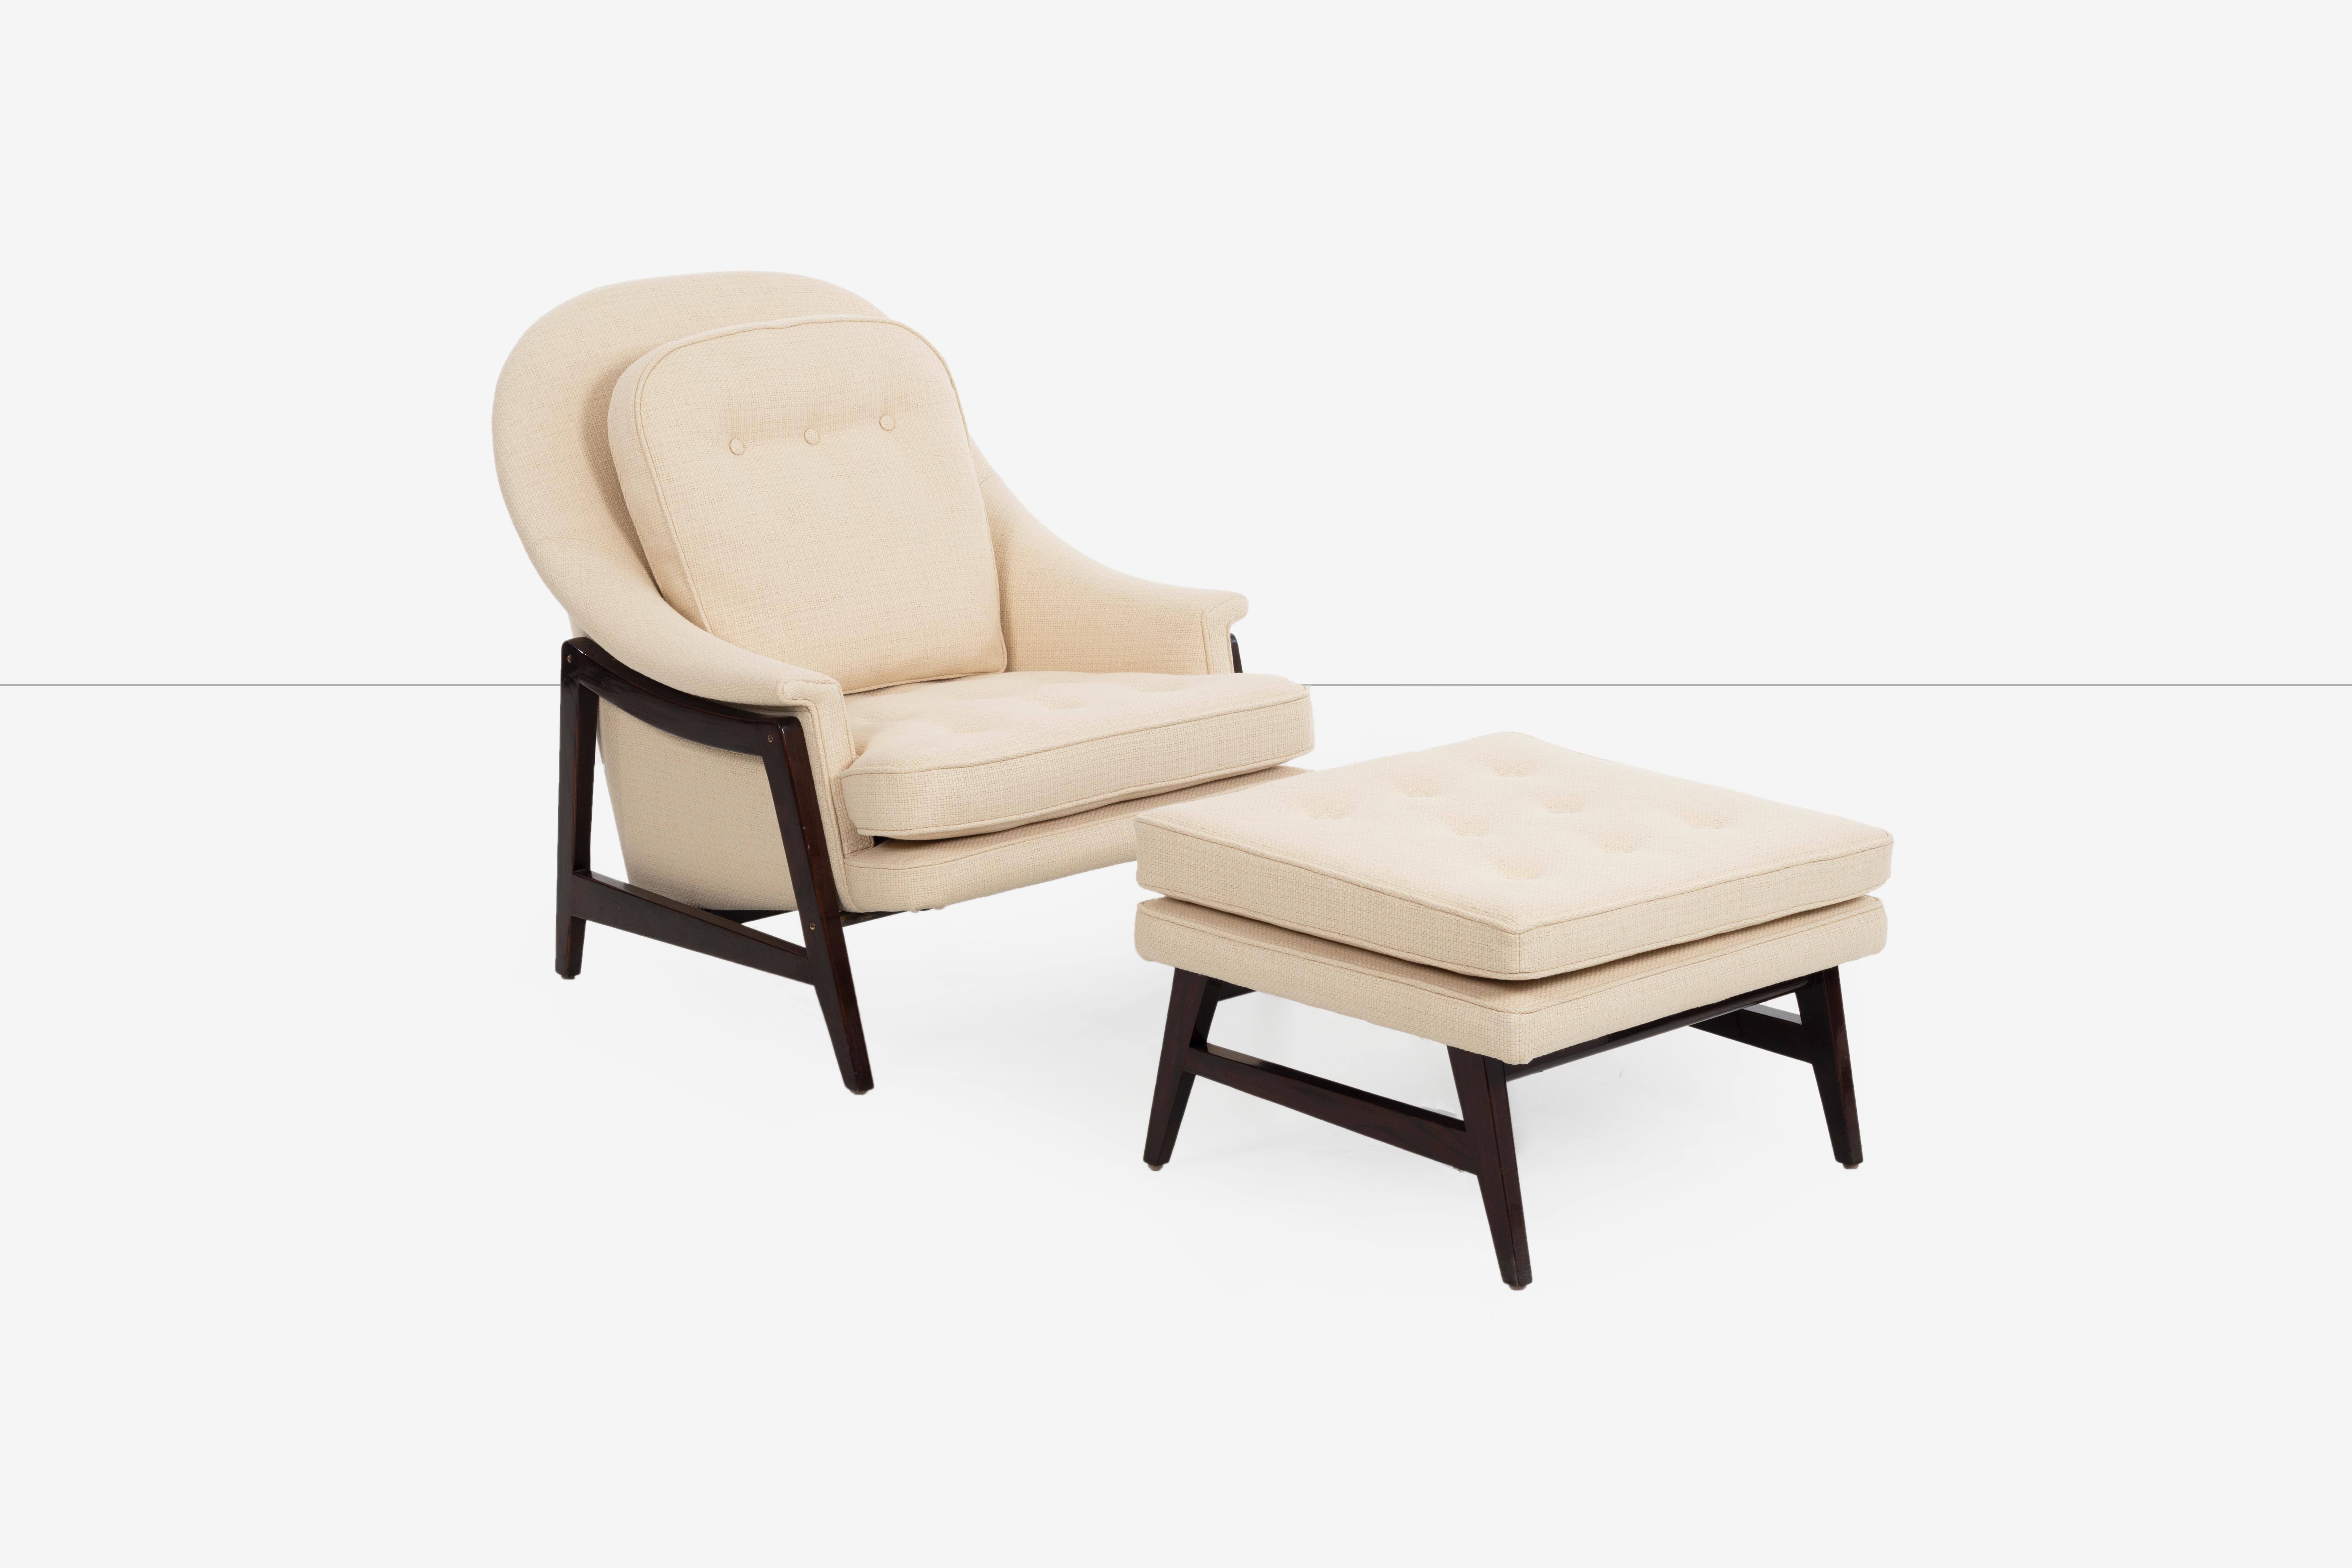 Edward Wormley for Dunbar, Janus collection lounge chair and ottoman, model 5701 Reupholstered in Holly Hunt, Great Plains cotton-poly weave with combed open grained ashwood frame and brass stretchers. 
[Dunbar signed under seat